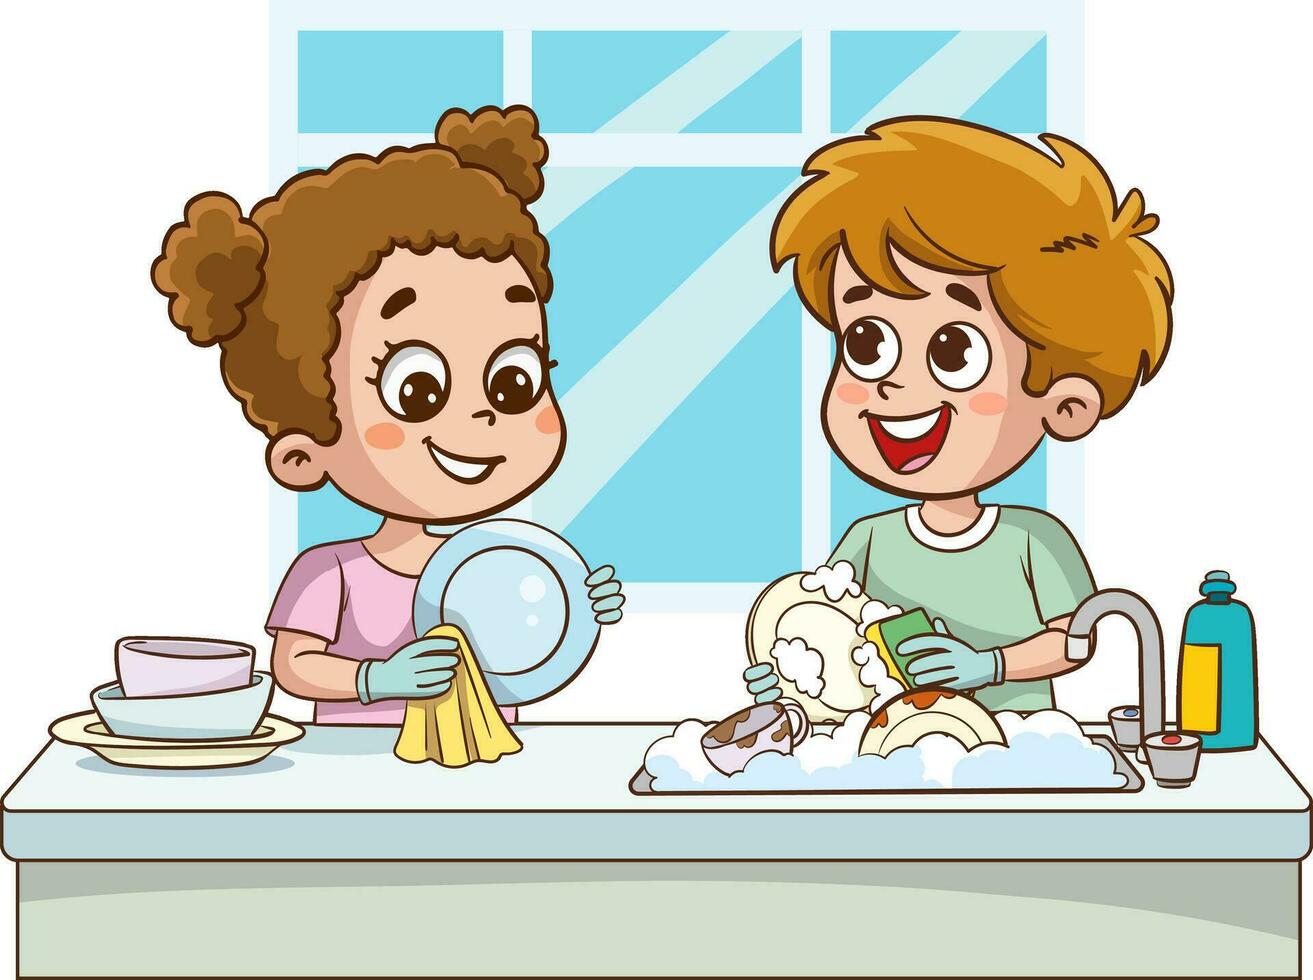 happy cute little boy and girl washing dish together.Happy little children doing housework and cleaning together vector